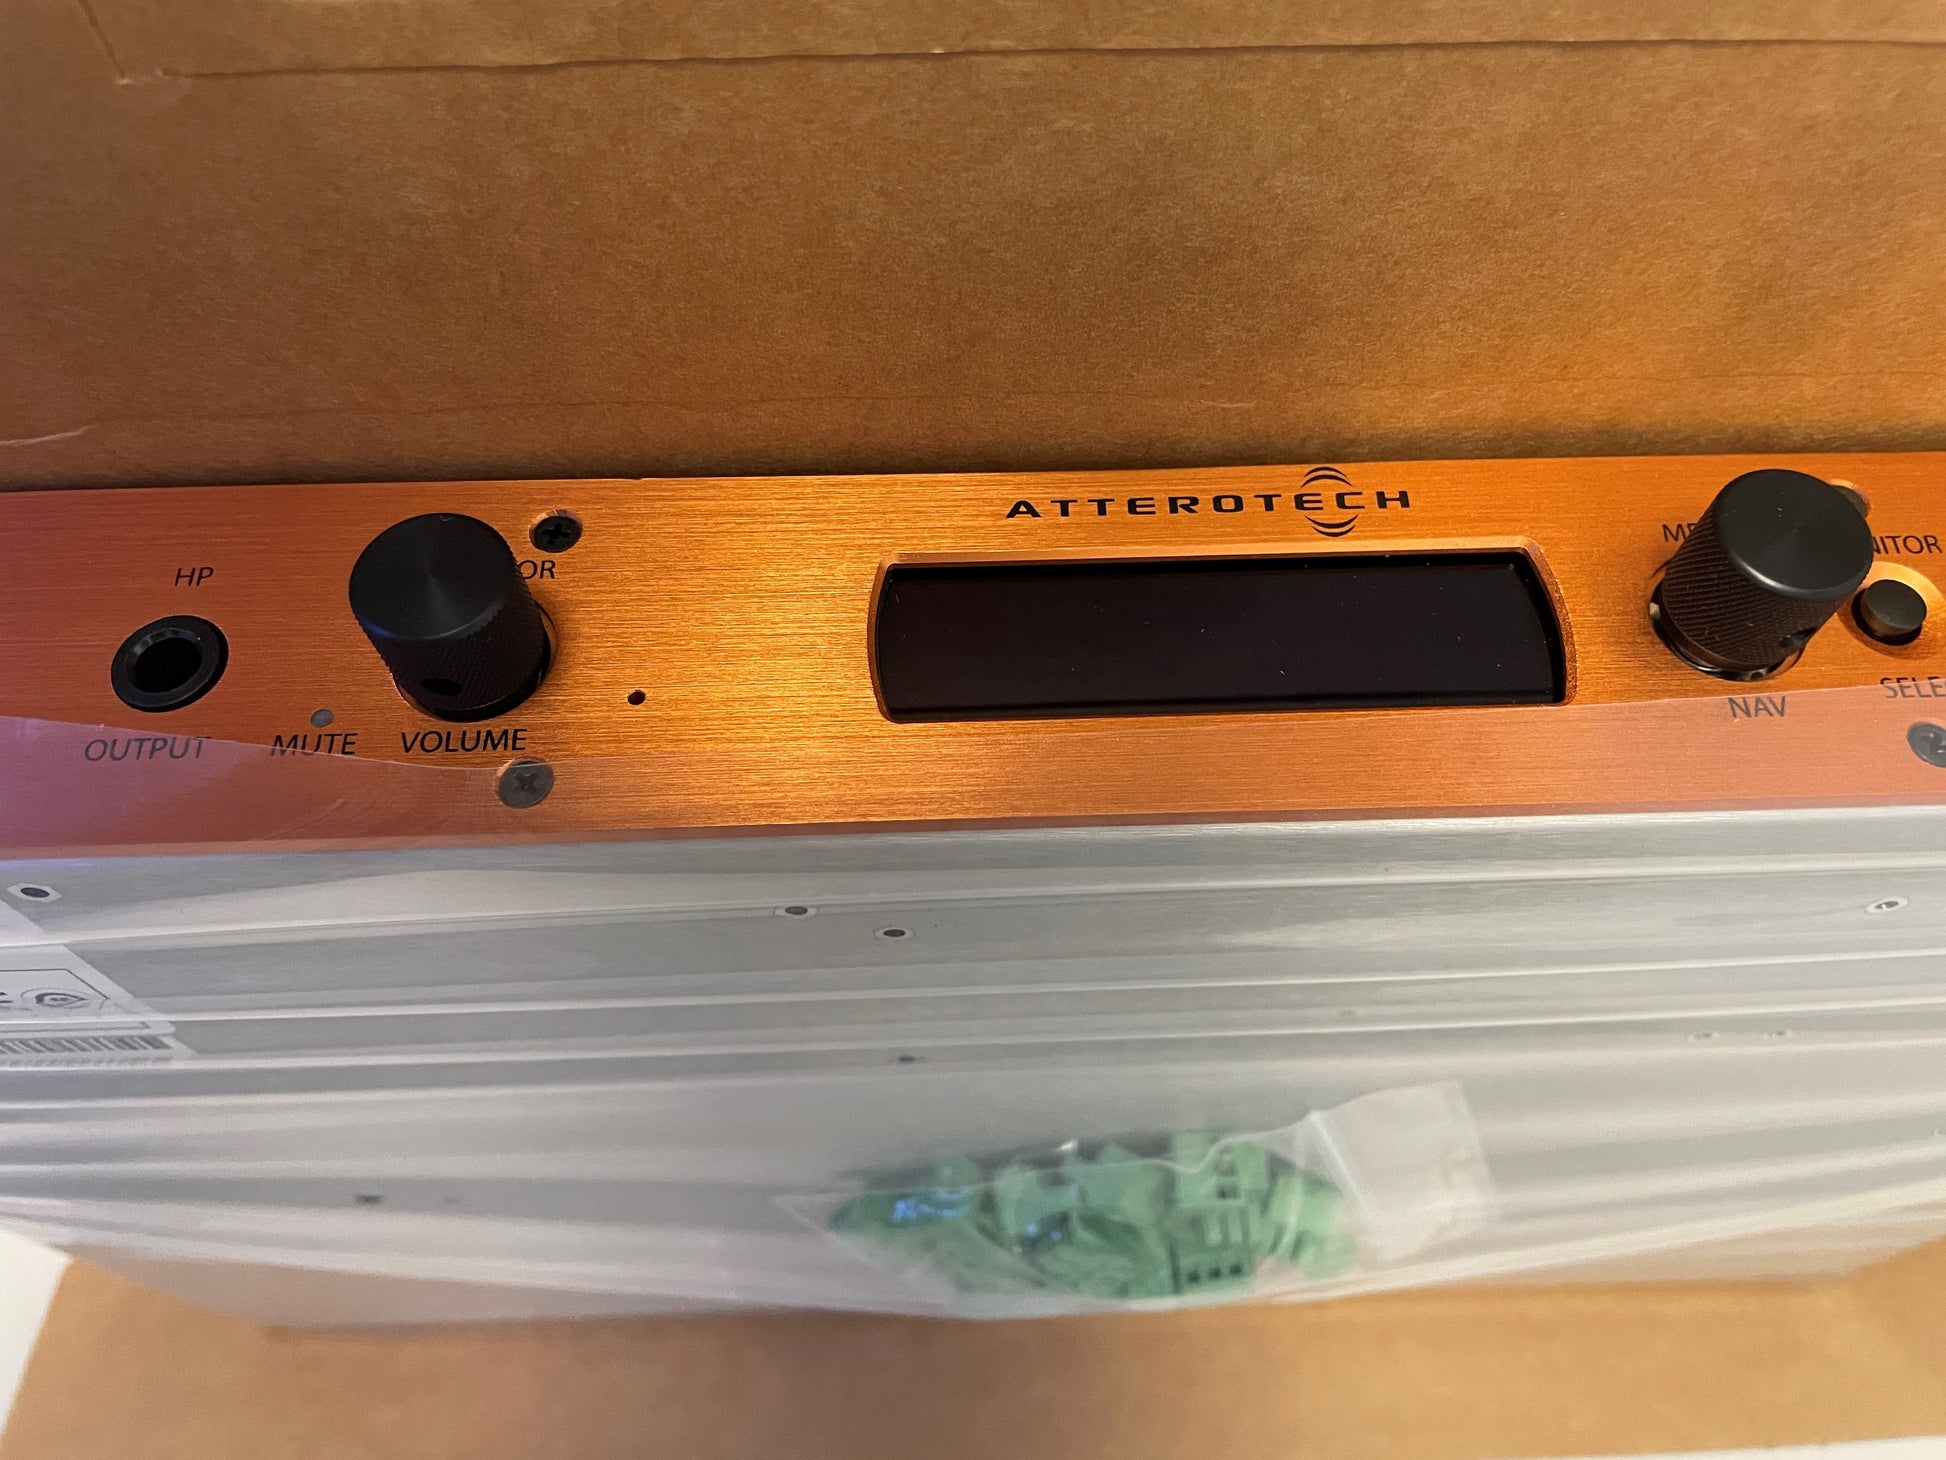 New Atterotech Synapse D321-TB for Sale. 					We Sell Professional Audio Equipment. Audio Systems, Amplifiers, Consoles, Mixers, Electronics, Entertainment, Sound, Live.